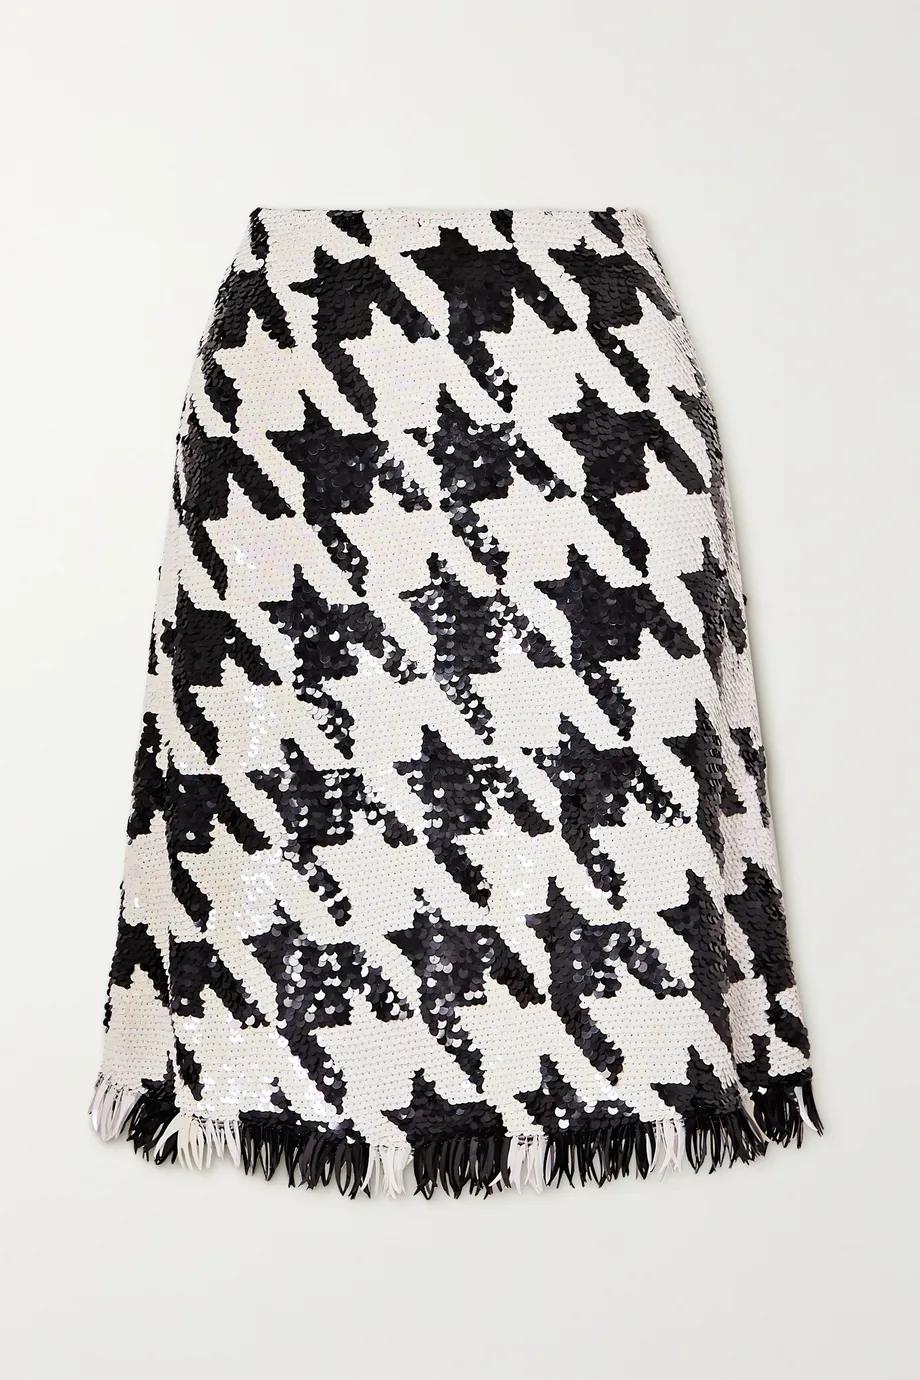 Fringed houndstooth sequined cotton skirt by ASHISH